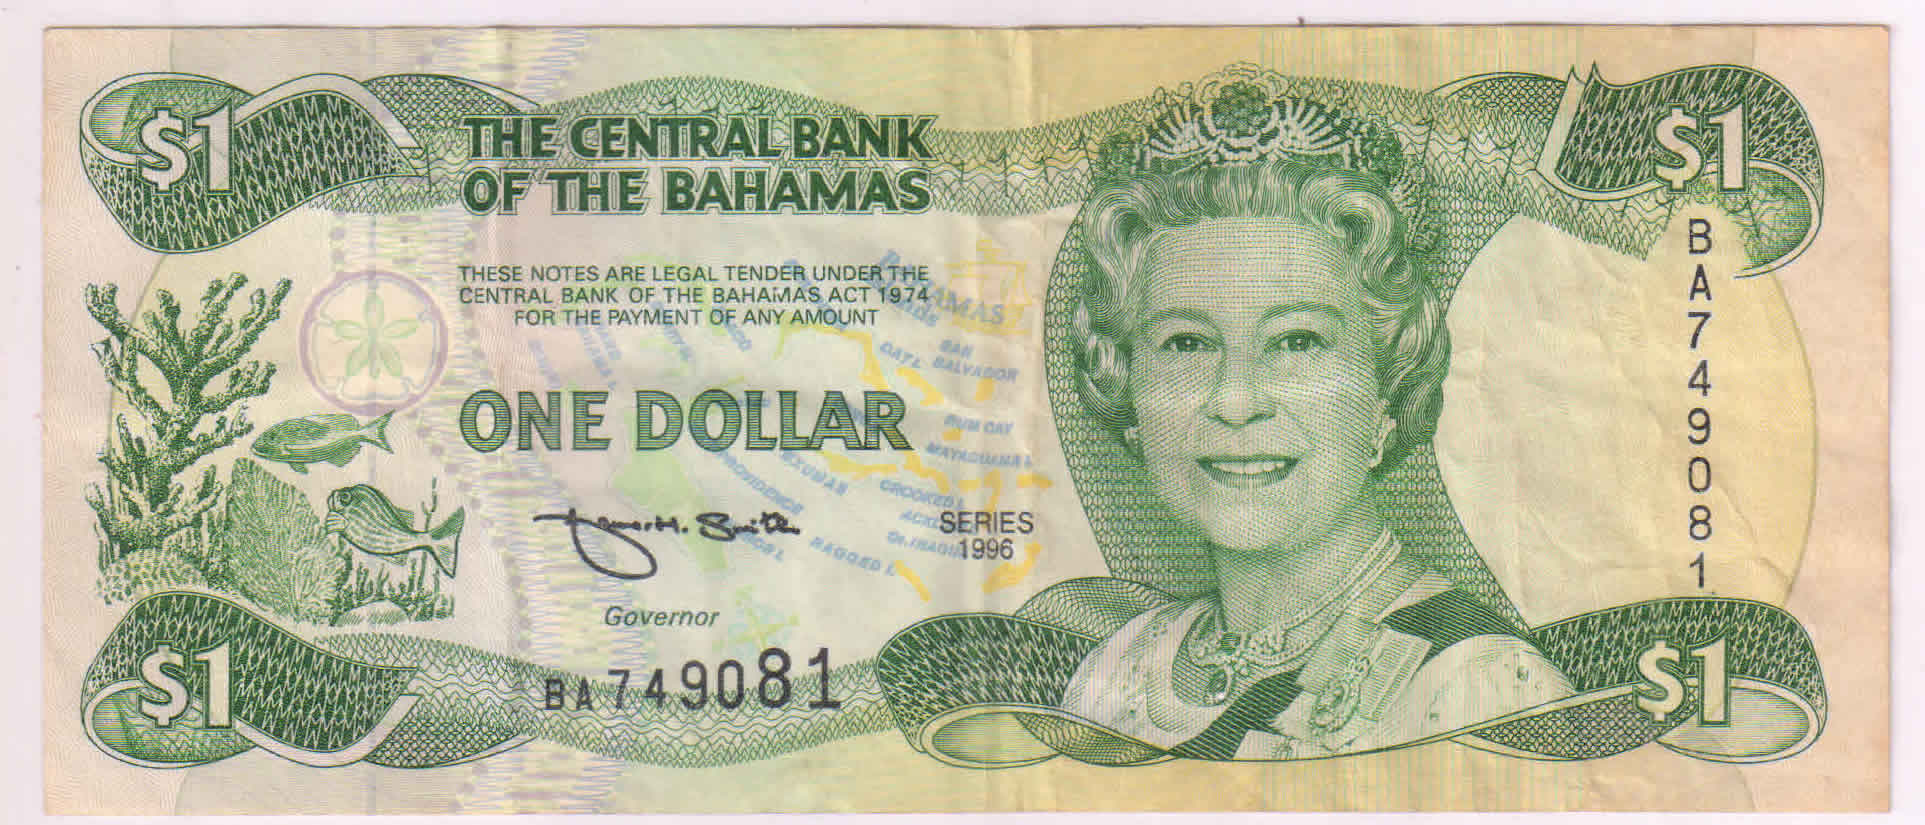 Bahamas 1 dollar 1996 vf currency note KB Coins & Currencies